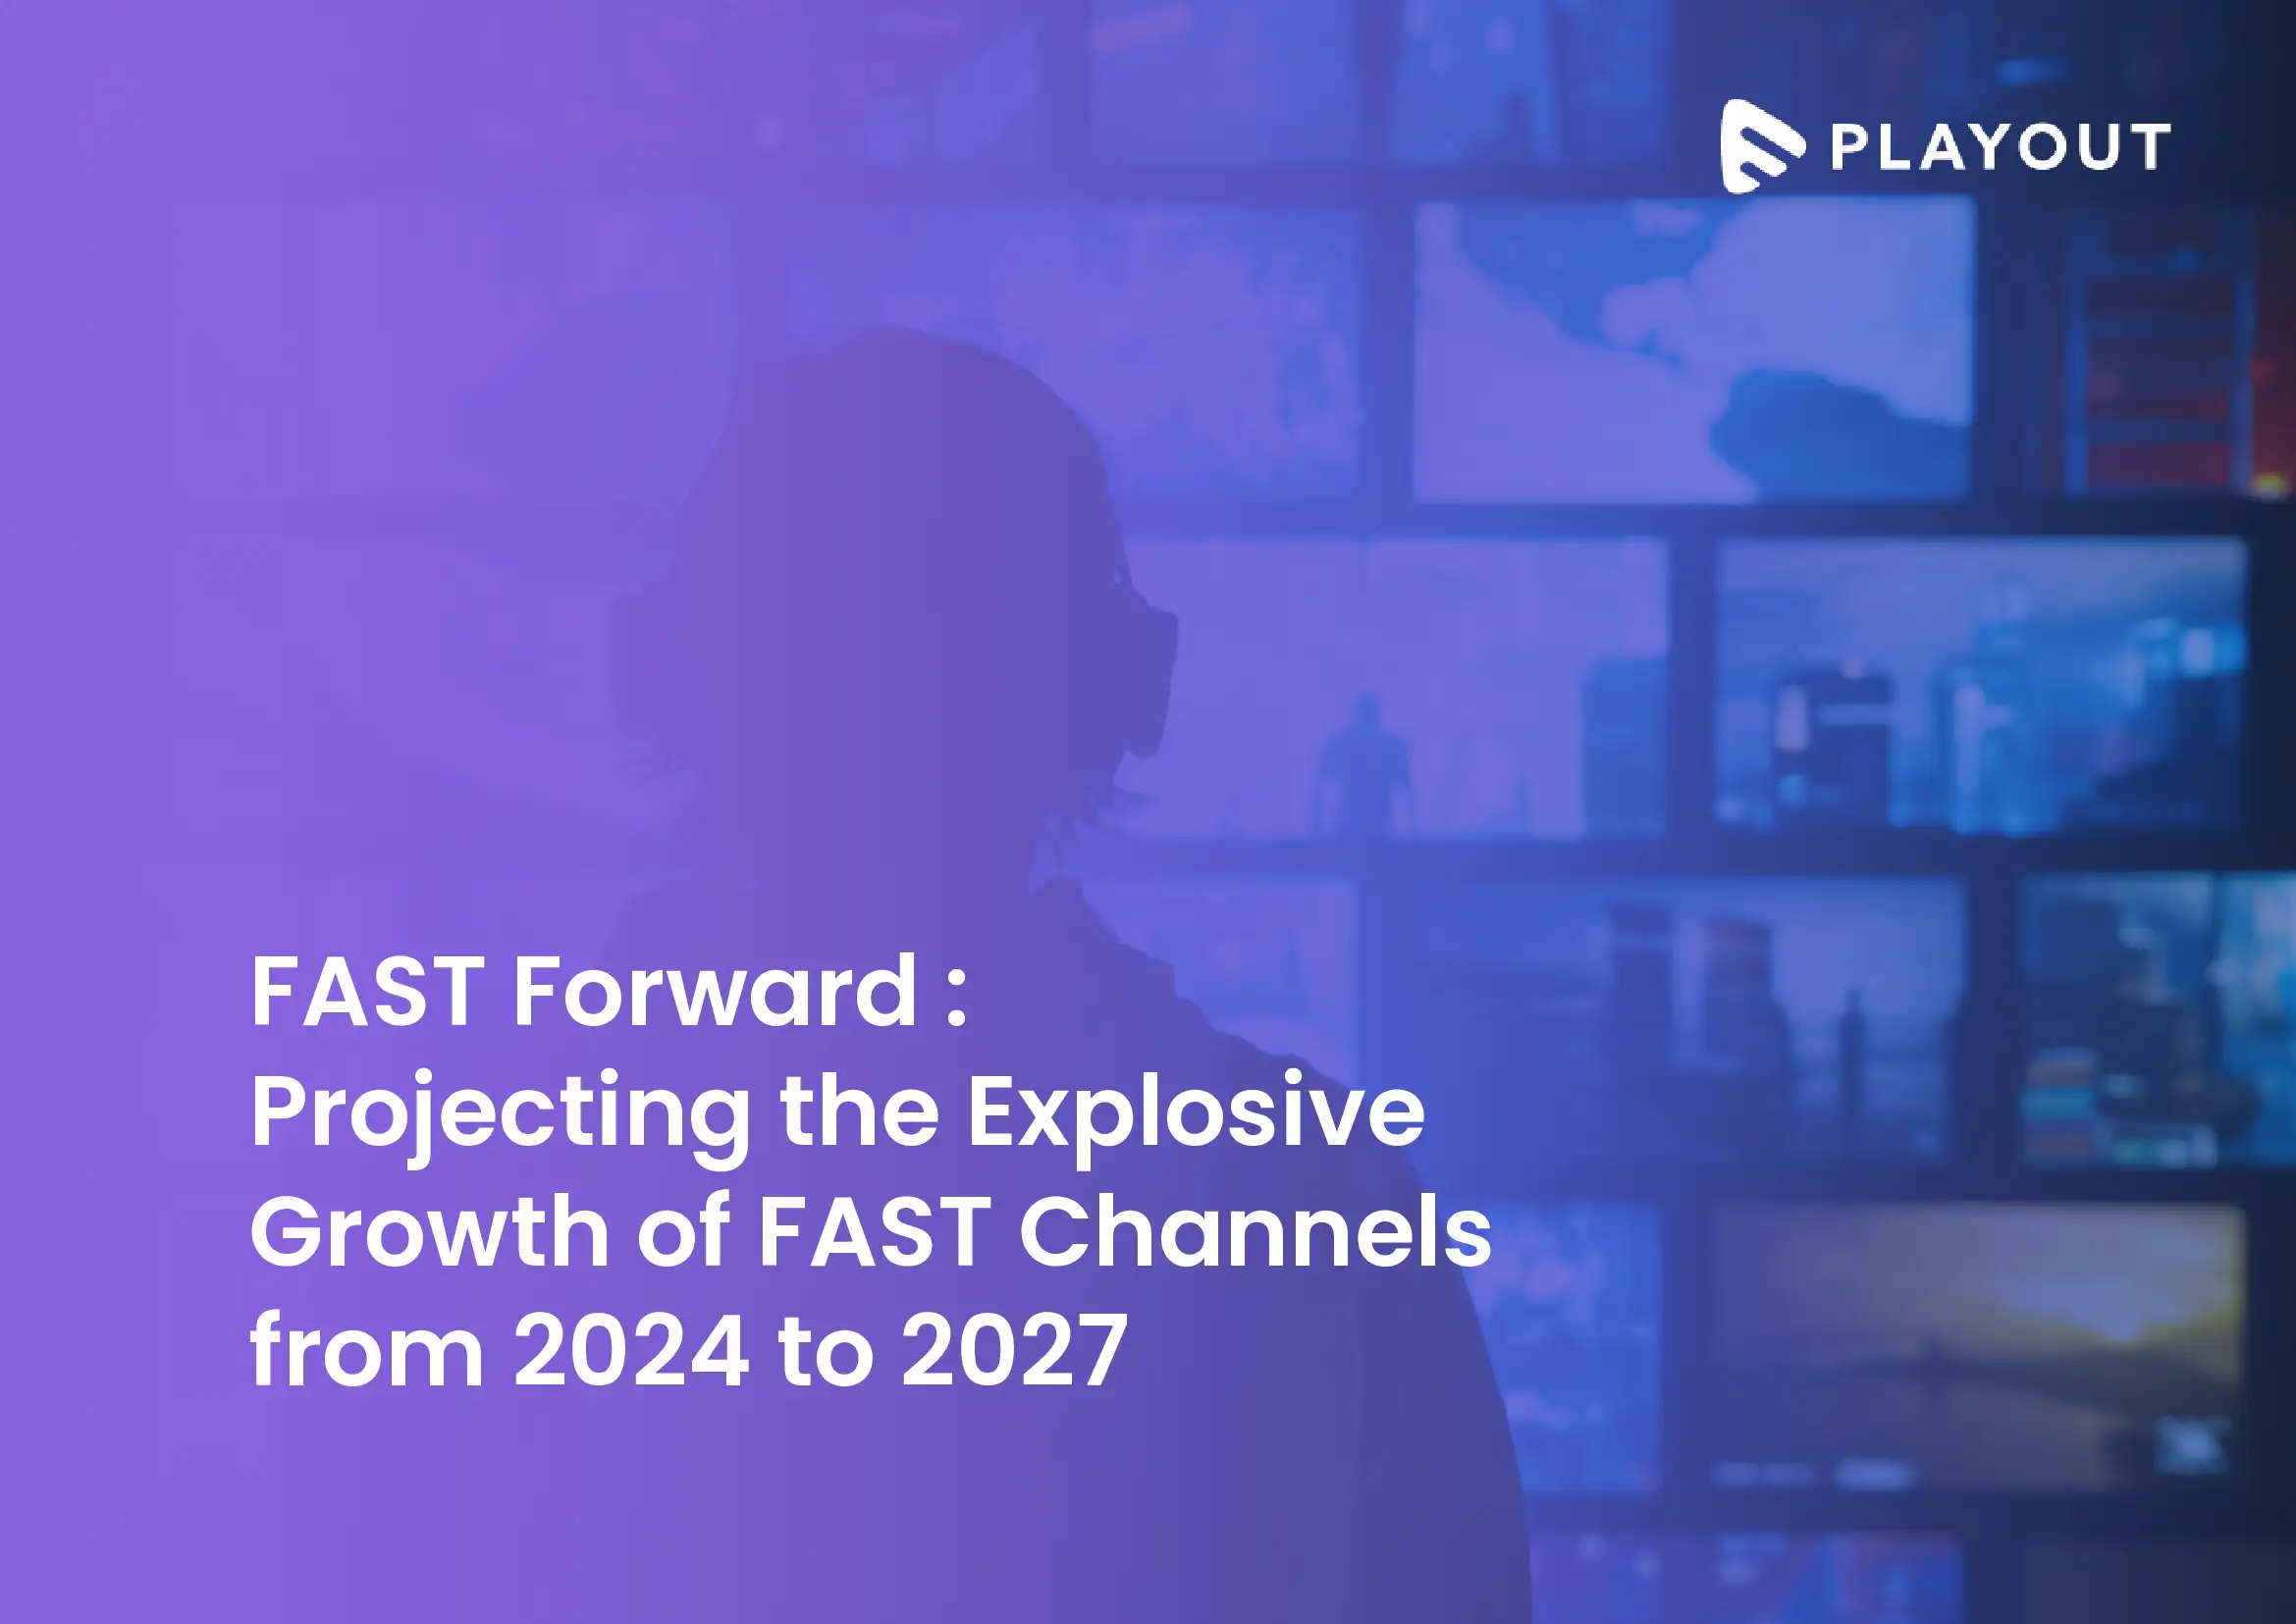 FAST Forward – Projecting the Explosive Growth of FAST Channels from 2024 to 2027